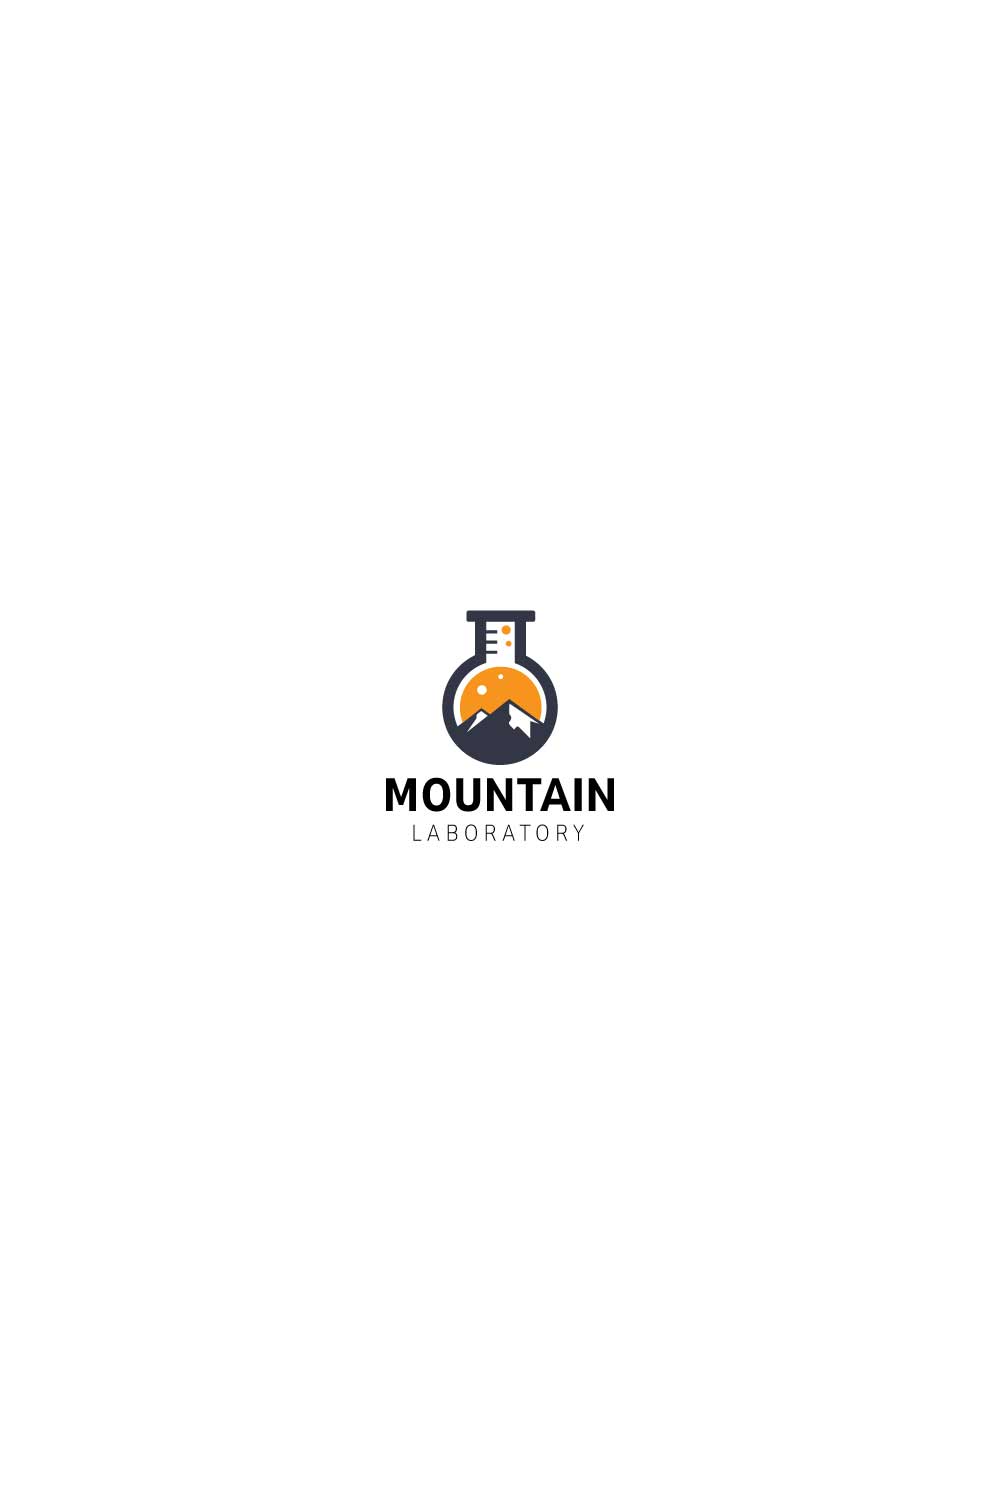 Lab with mountain logo design pinterest preview image.